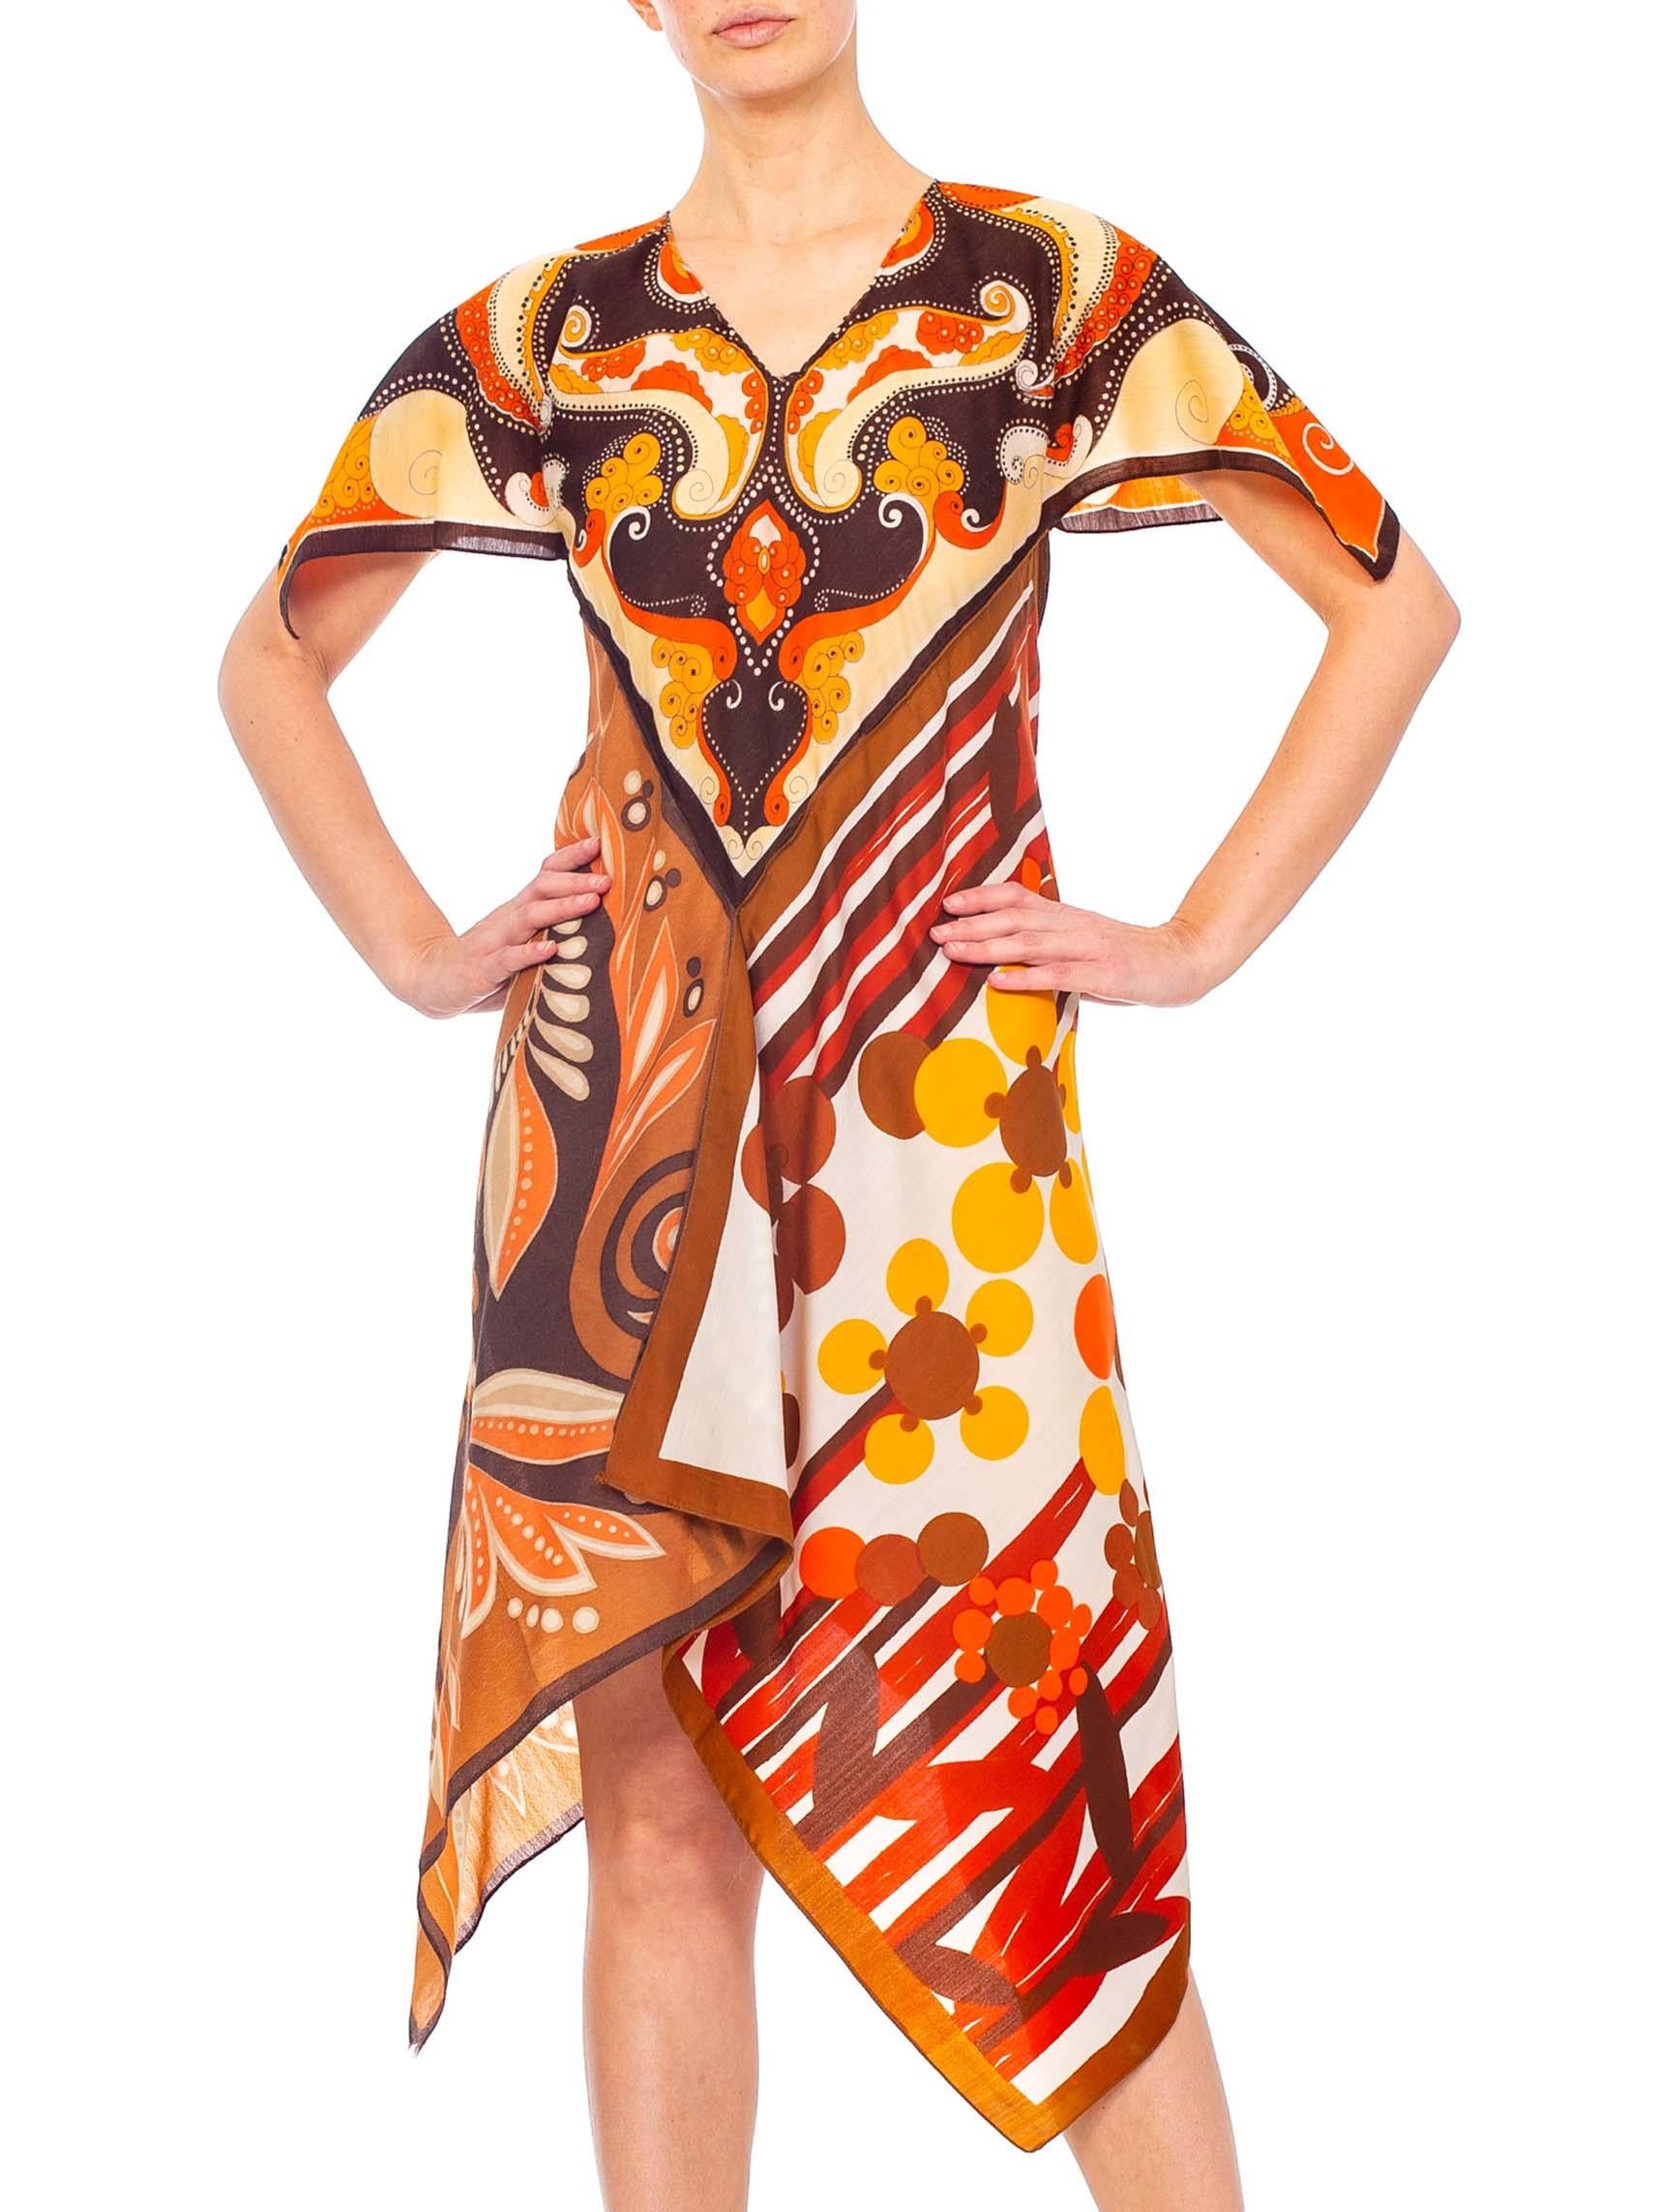 MORPHEW COLLECTION Brown & Orange Polyester Psychedelic Print Scarf Kaftan Dress In Excellent Condition For Sale In New York, NY